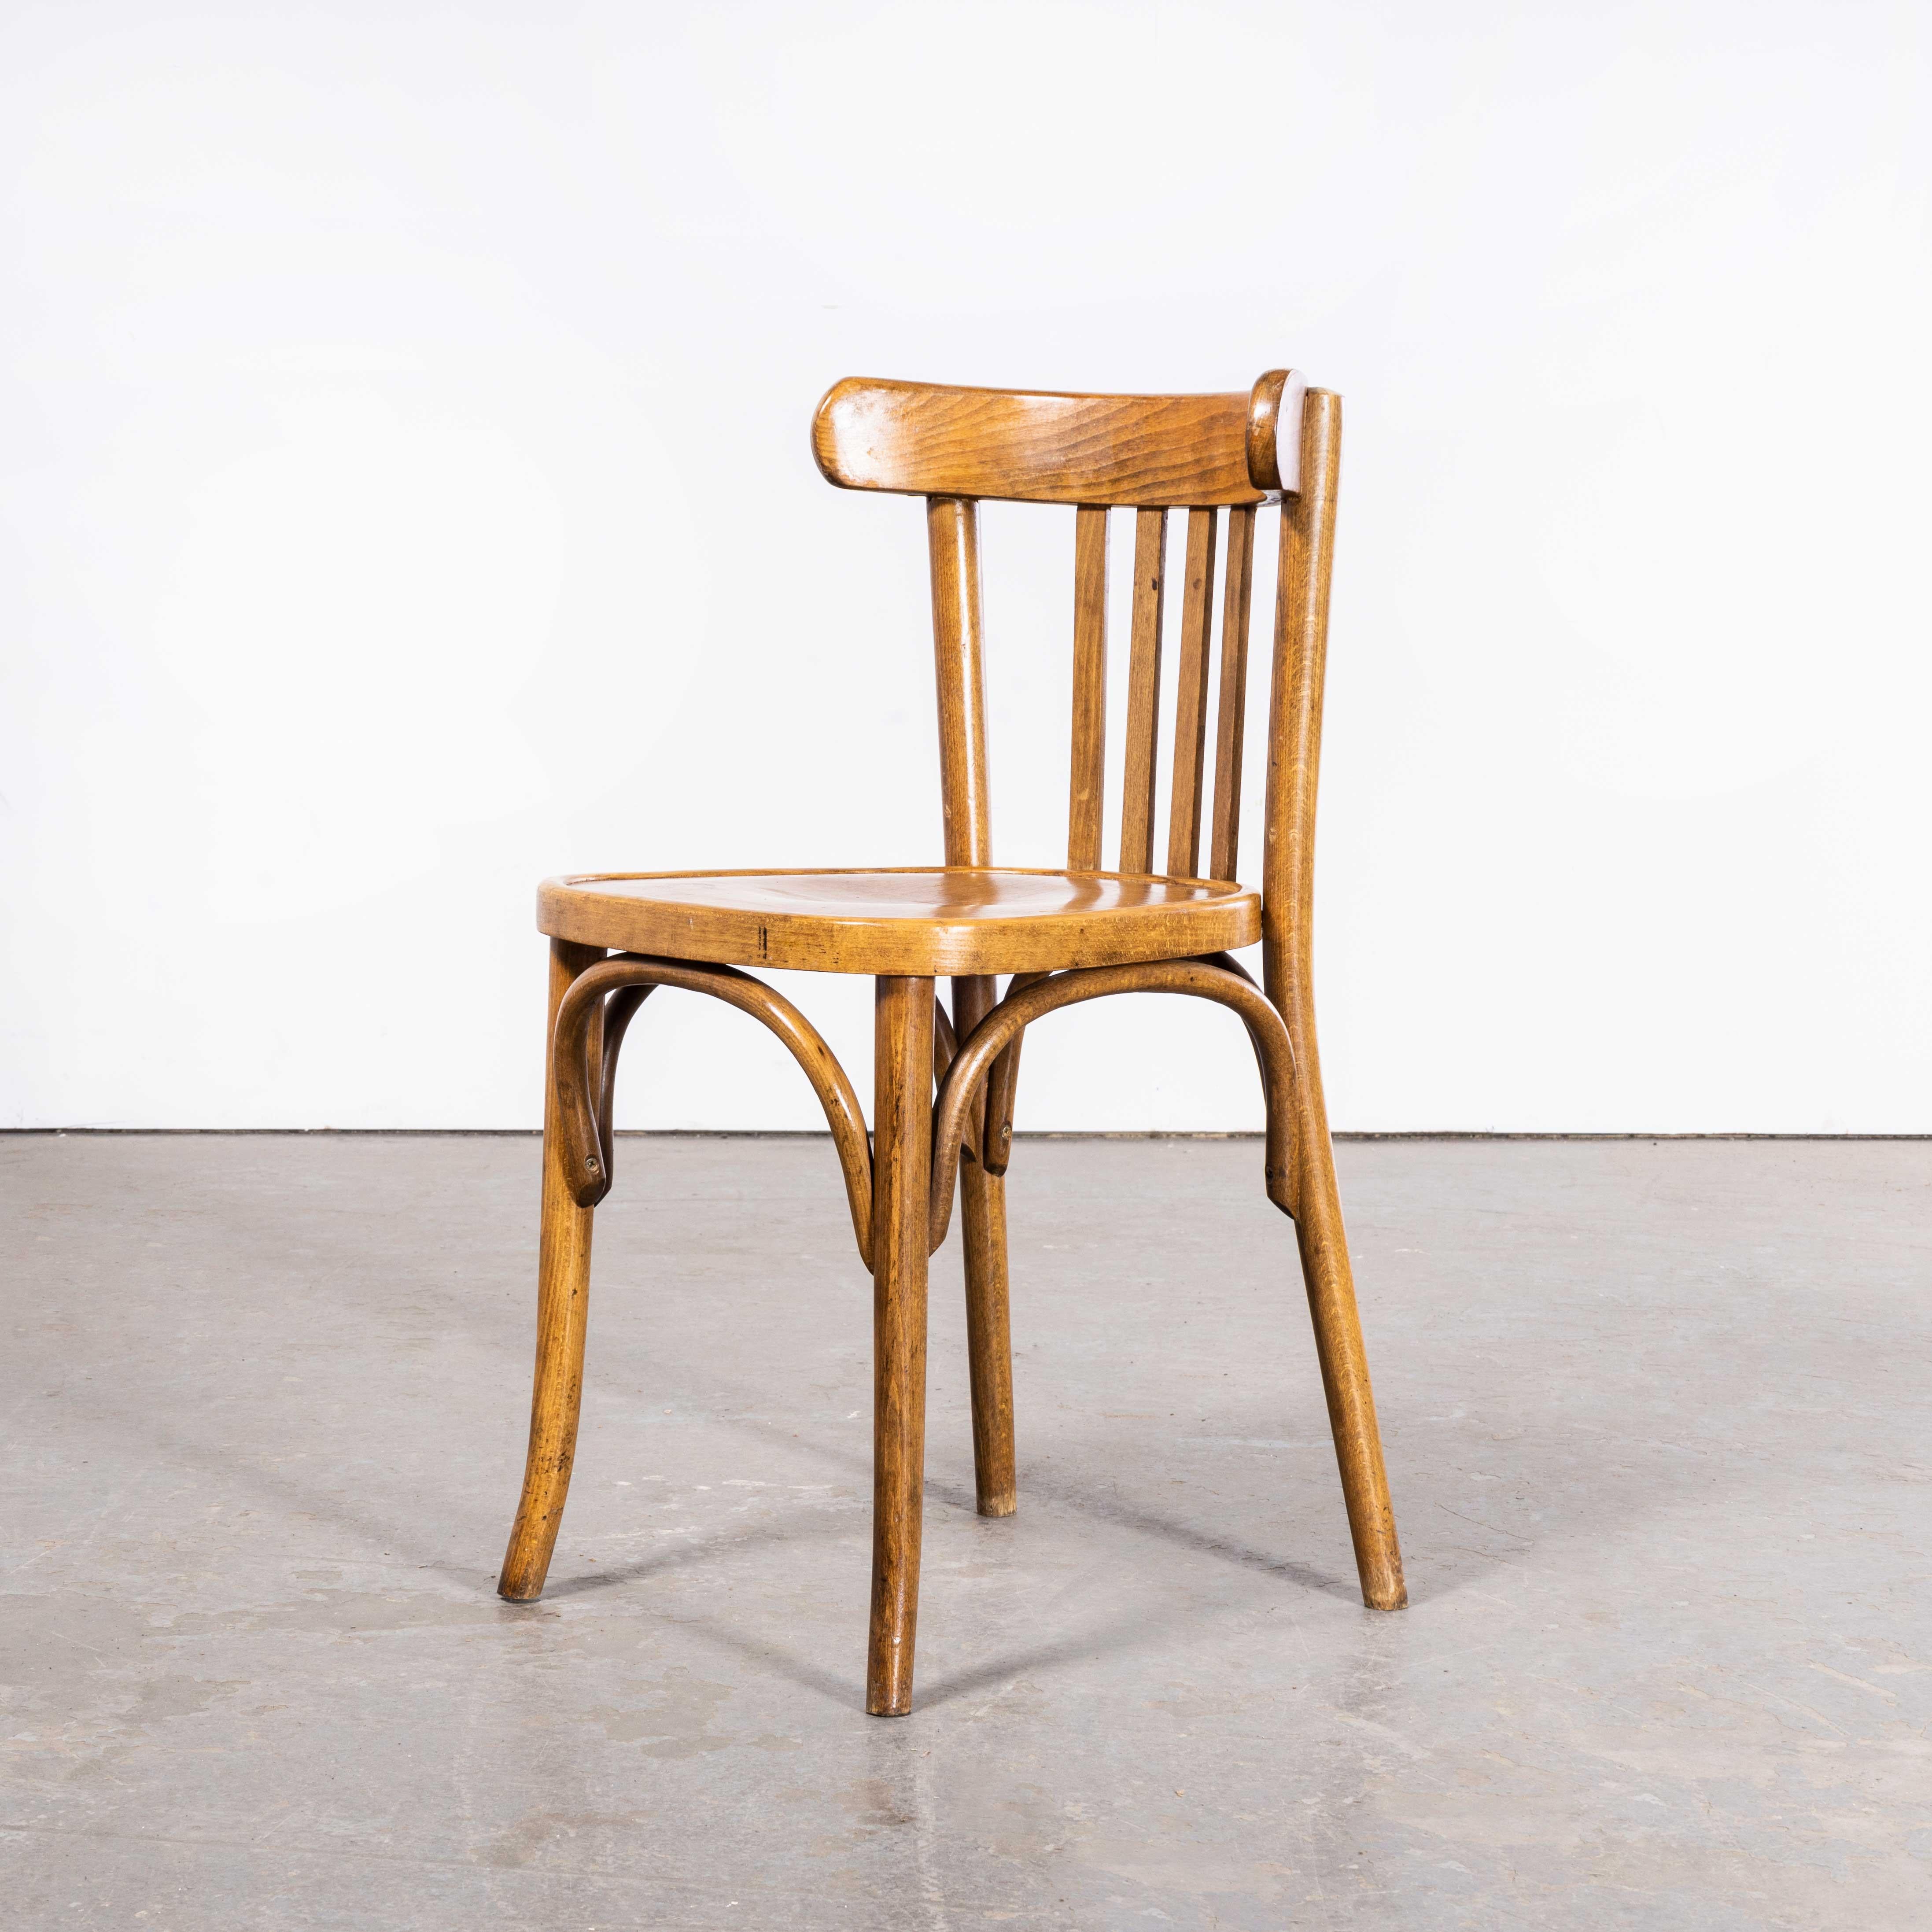 1950’s Luterma Honey Beech Bentwood Dining Chair – Set Of Four
1950’s Luterma Honey Beech Bentwood Dining Chair – Set Of Four. The process of steam bending beech to create elegant chairs was discovered and developed by Thonet, but when its patents